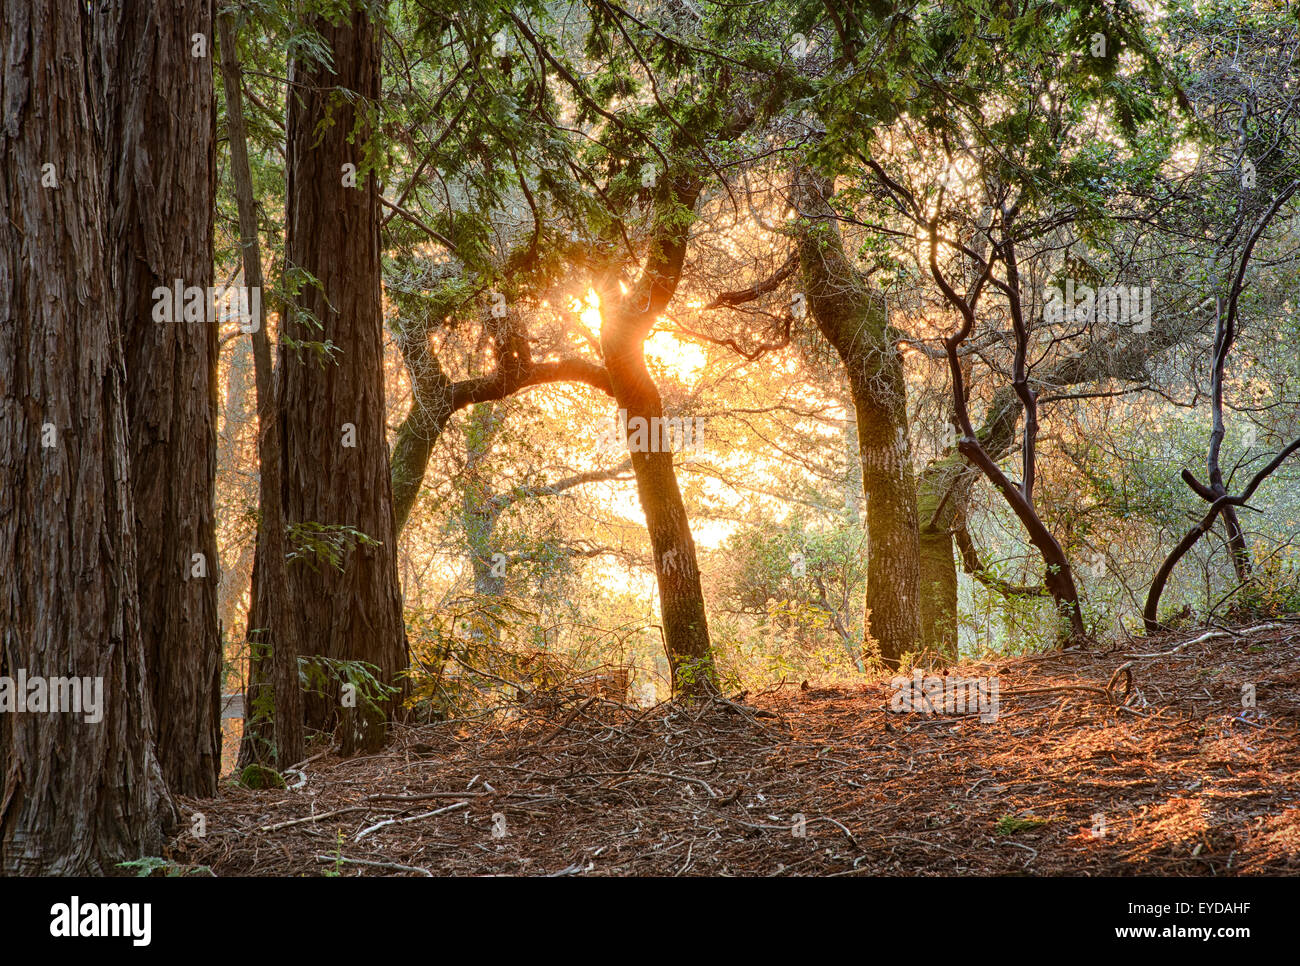 Northern California Landscapes, Sunsets, and Sunrises Stock Photo